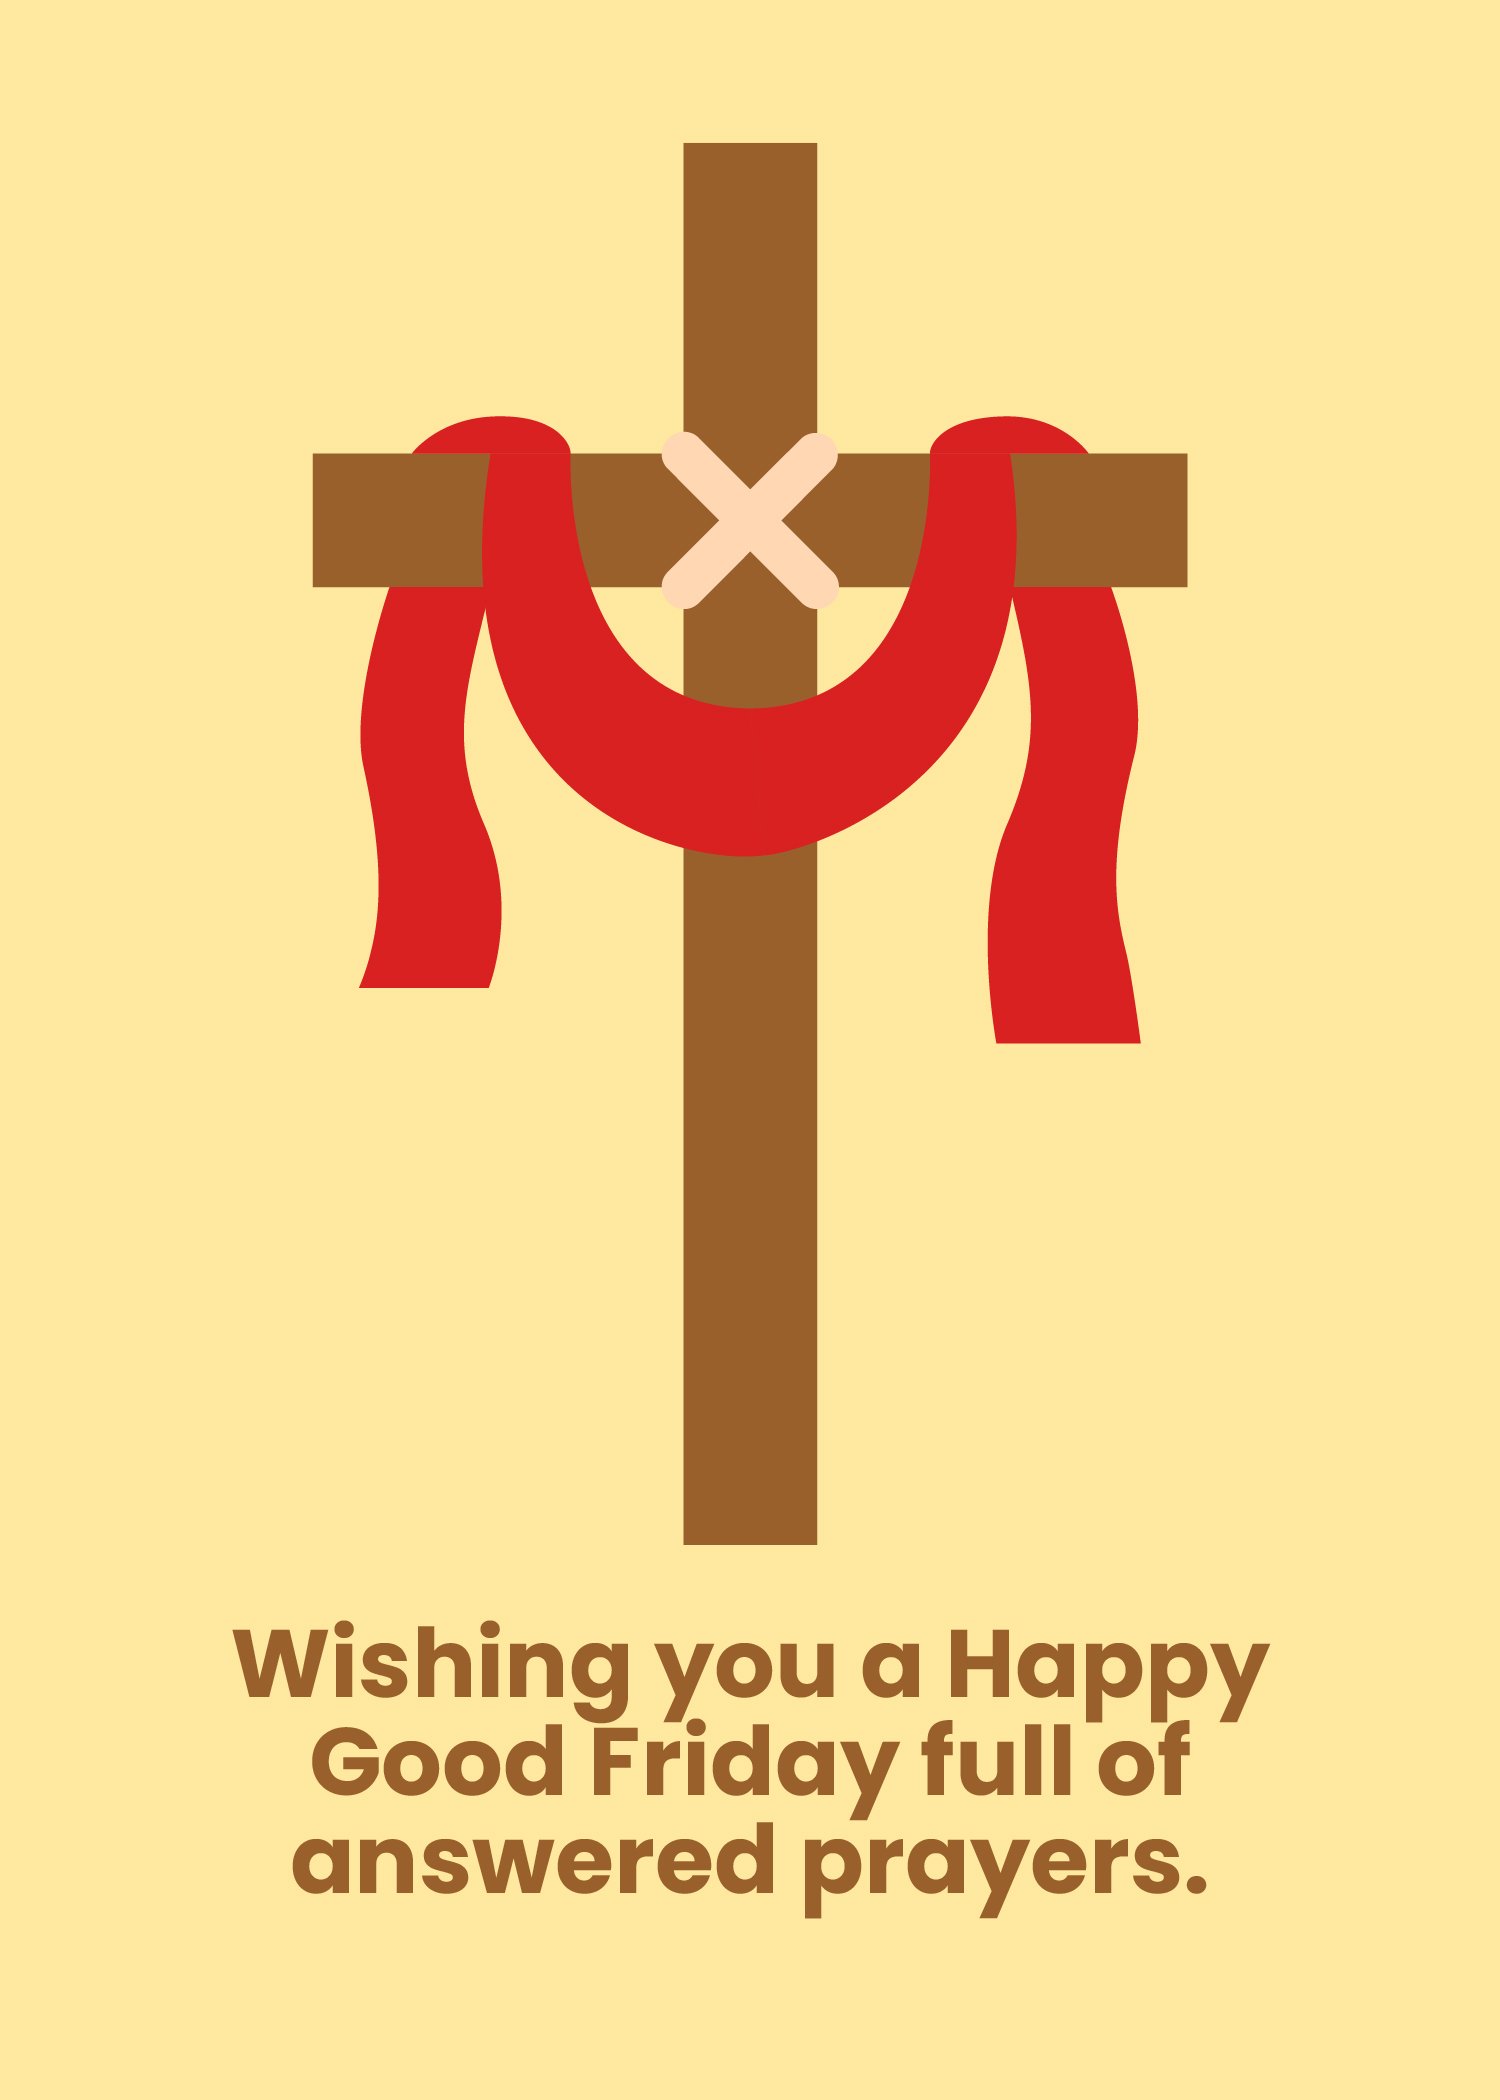 Free Good Friday Wishes in Word, Google Docs, Illustrator, PSD, EPS, SVG, PNG, JPEG